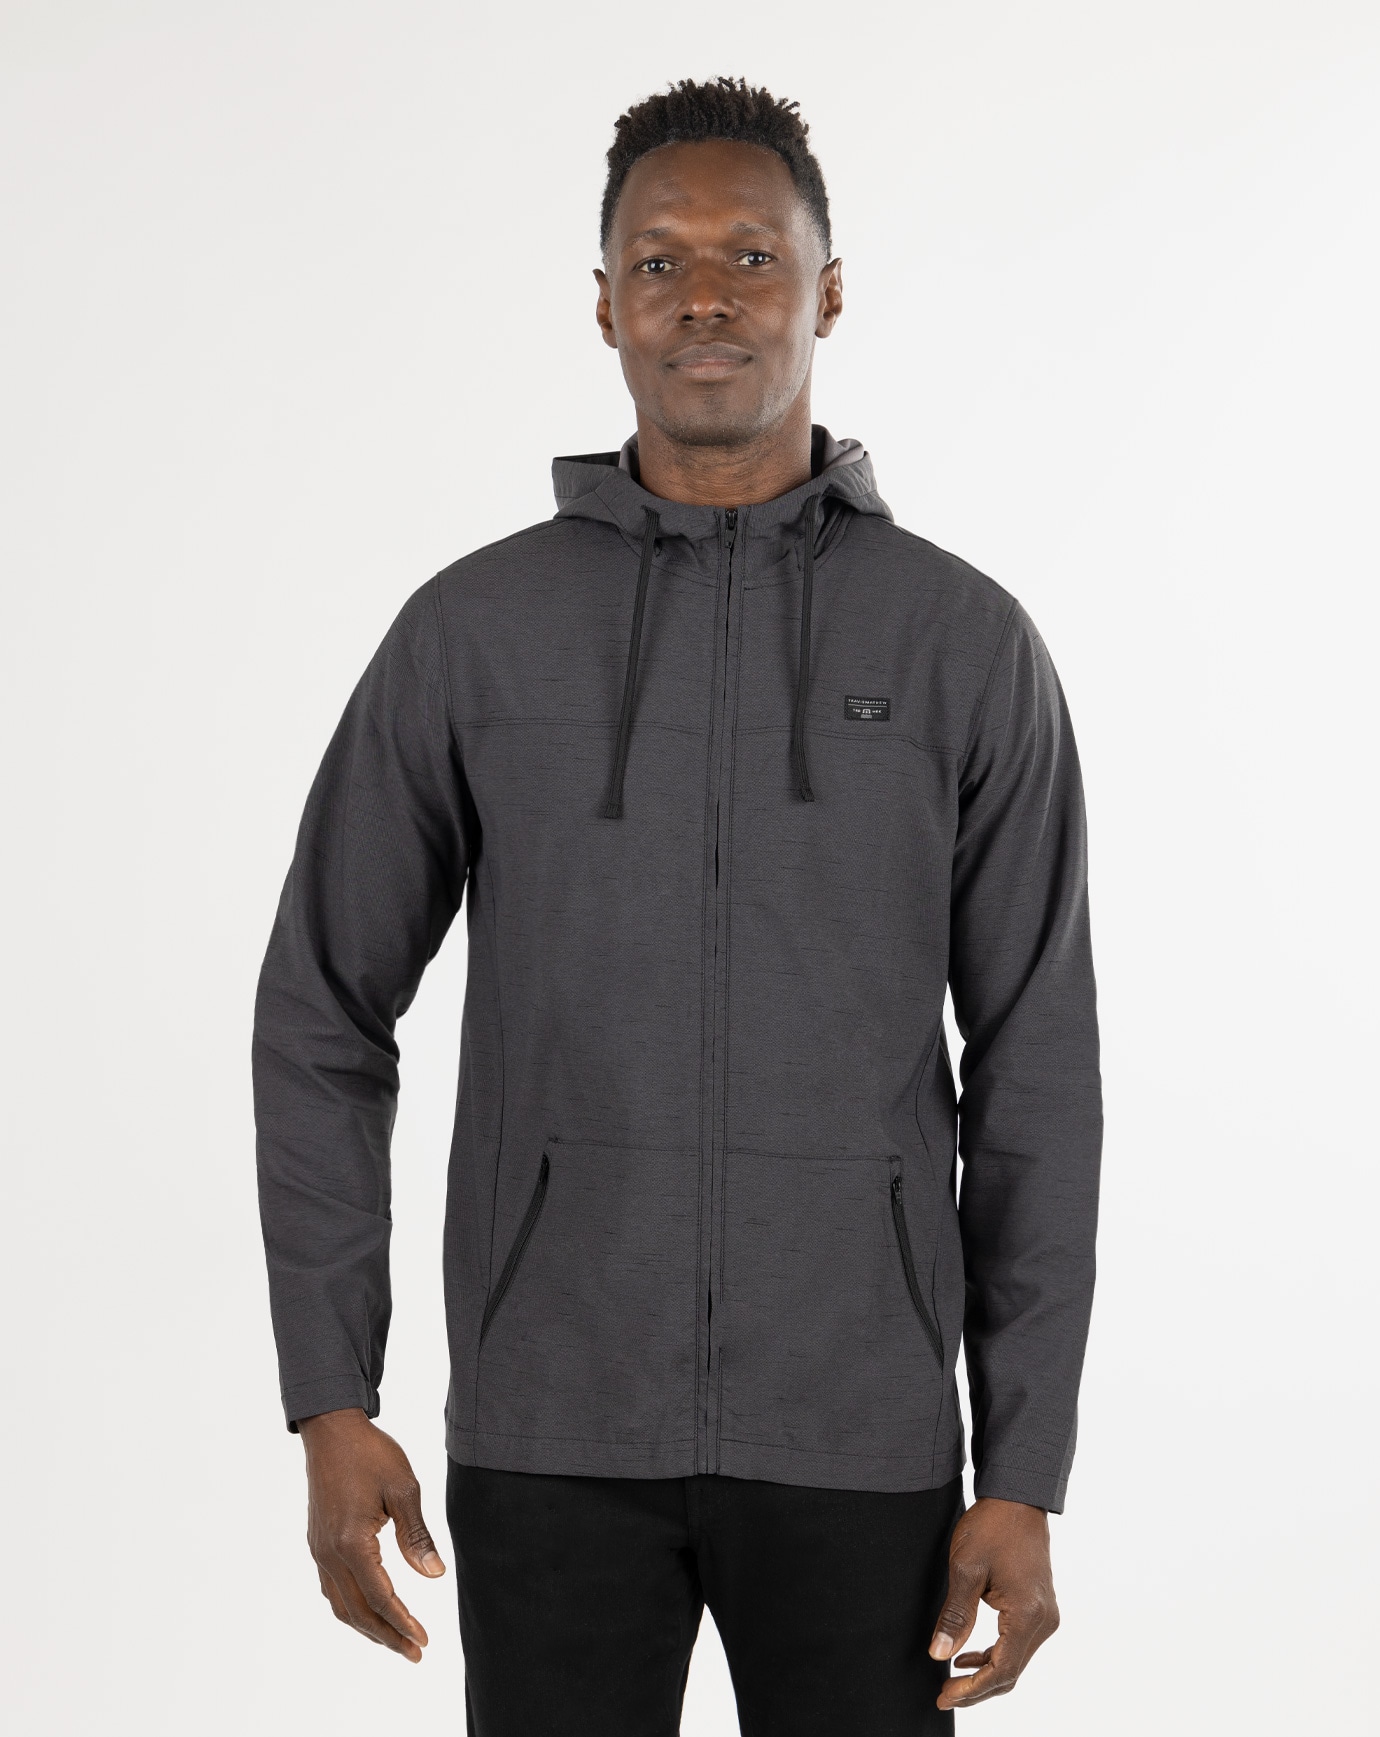 Related Product - ELEMENT OF SURPRISE FULL ZIP HOODIE